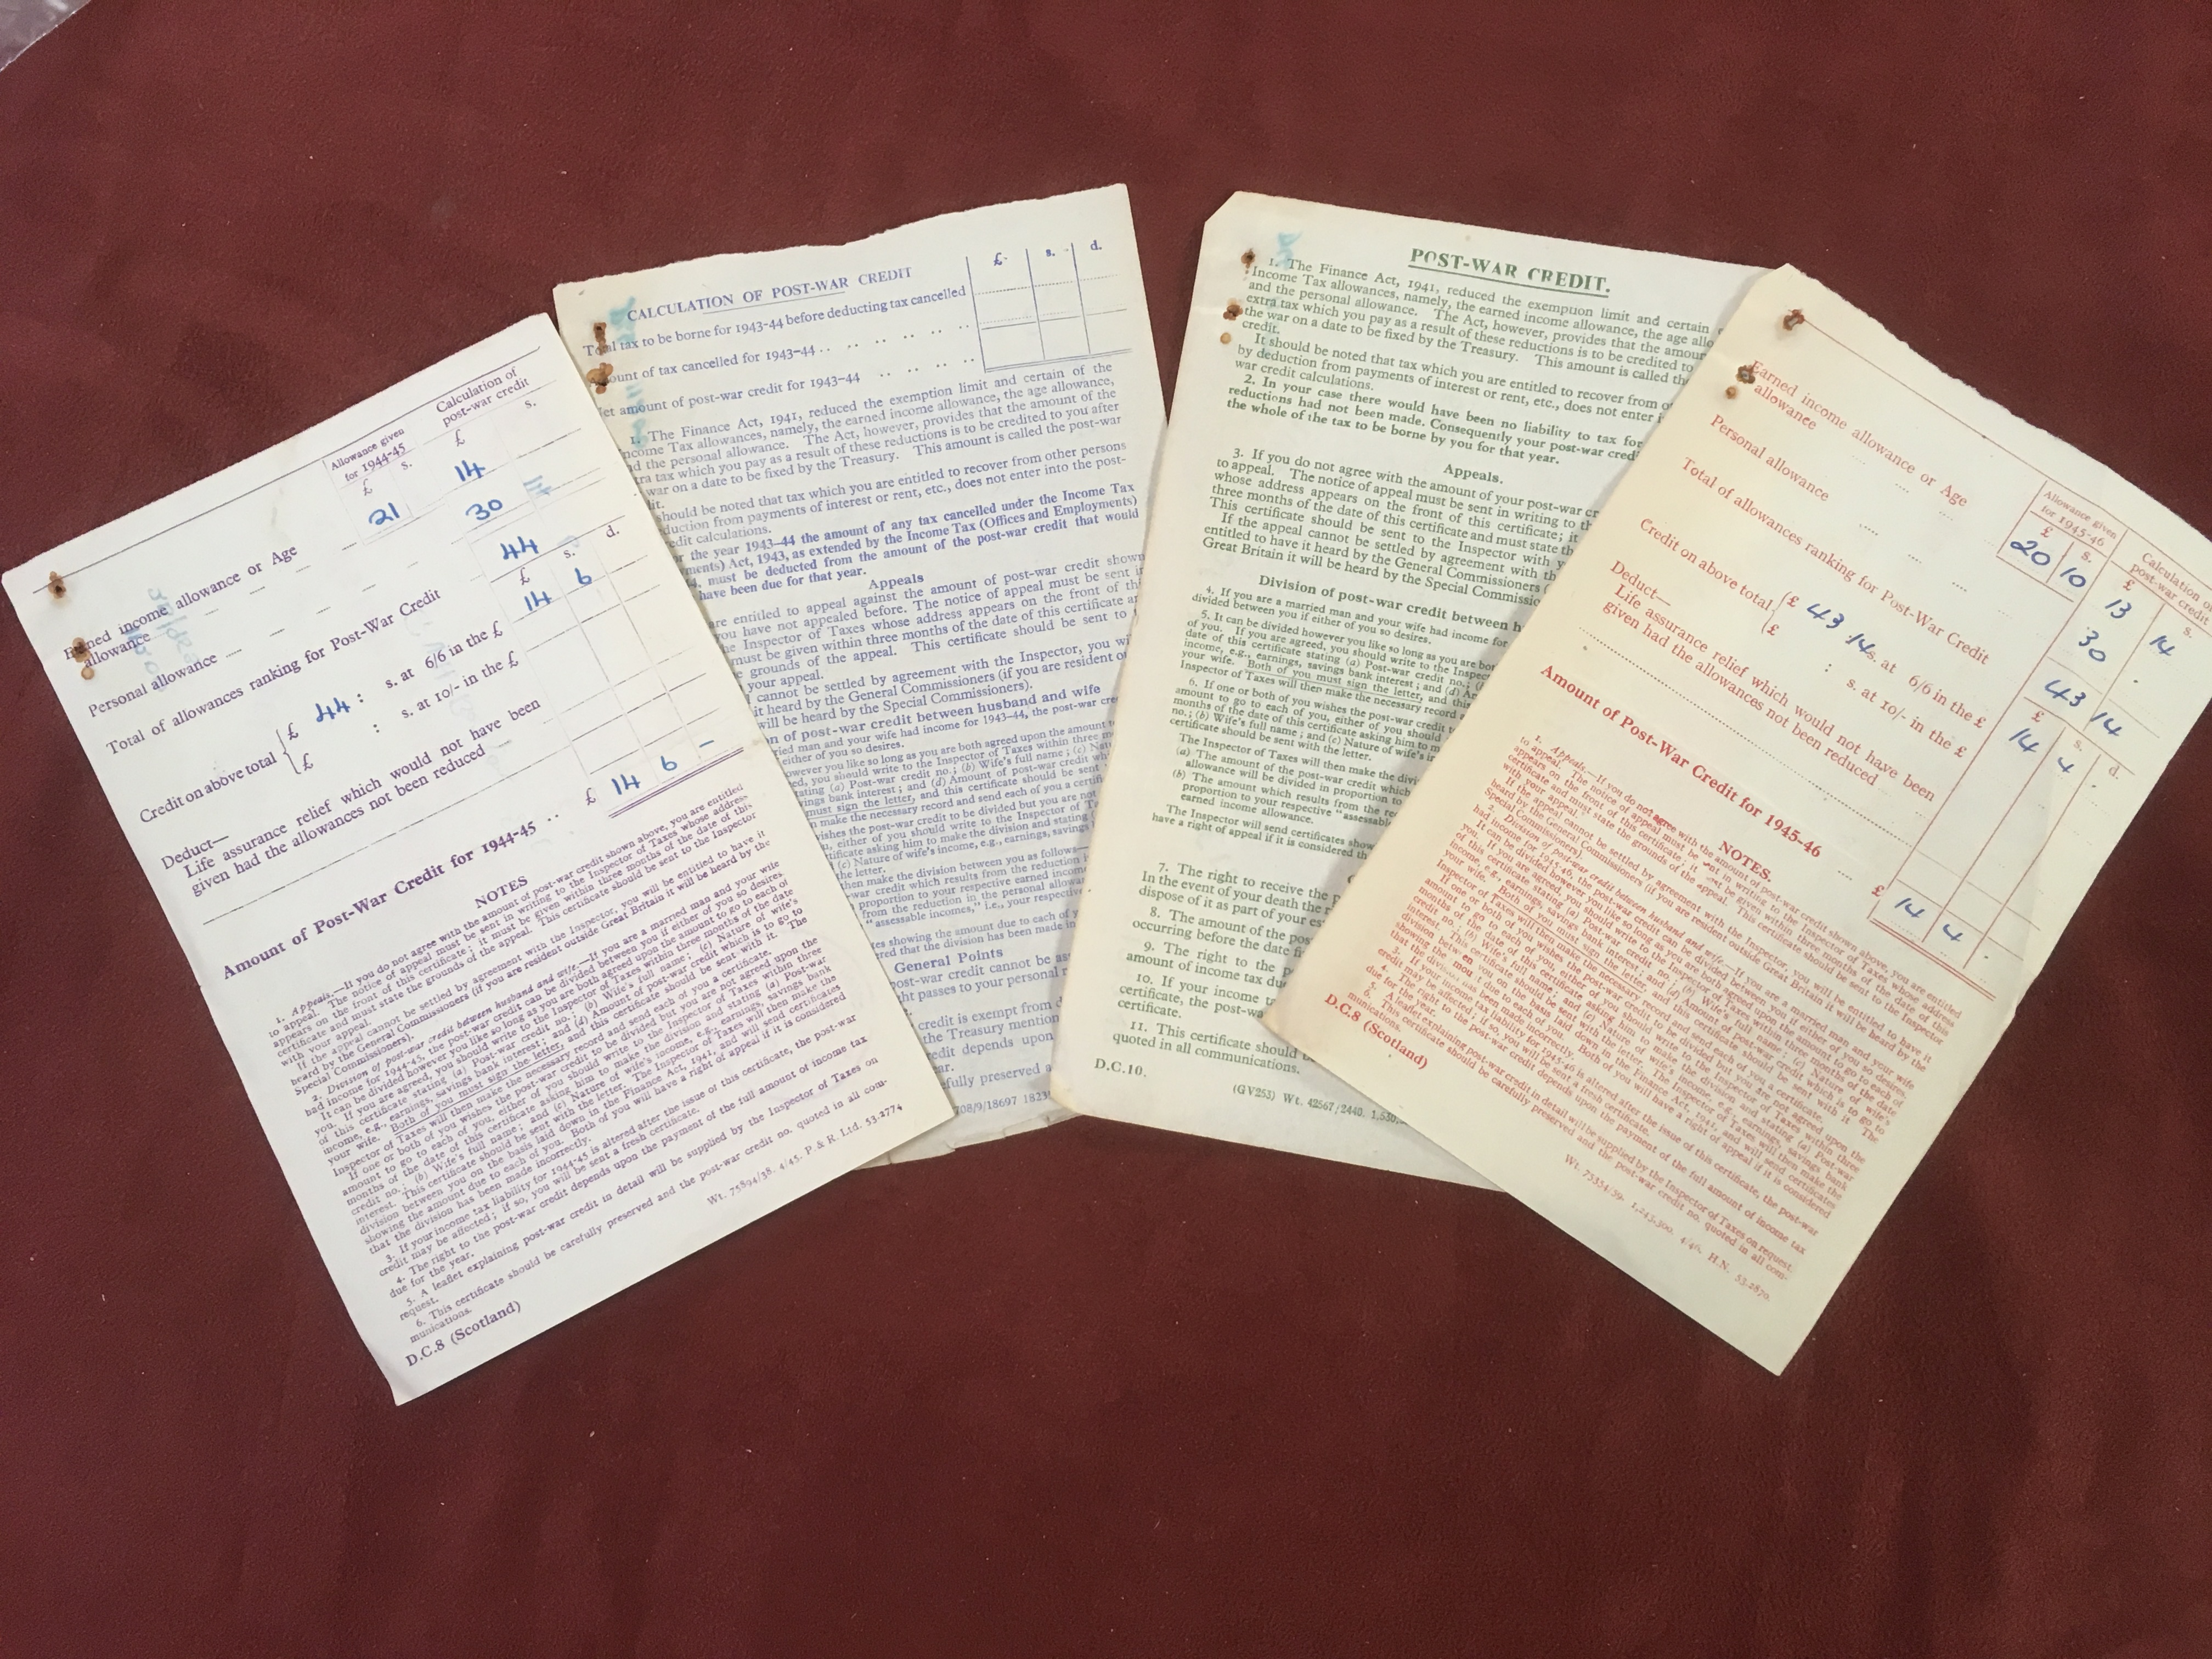 POST-WAR CREDIT CERTIFICATES FOR 1942-43, 1943-44, 1944-45 AND 1945-46, - Image 2 of 2